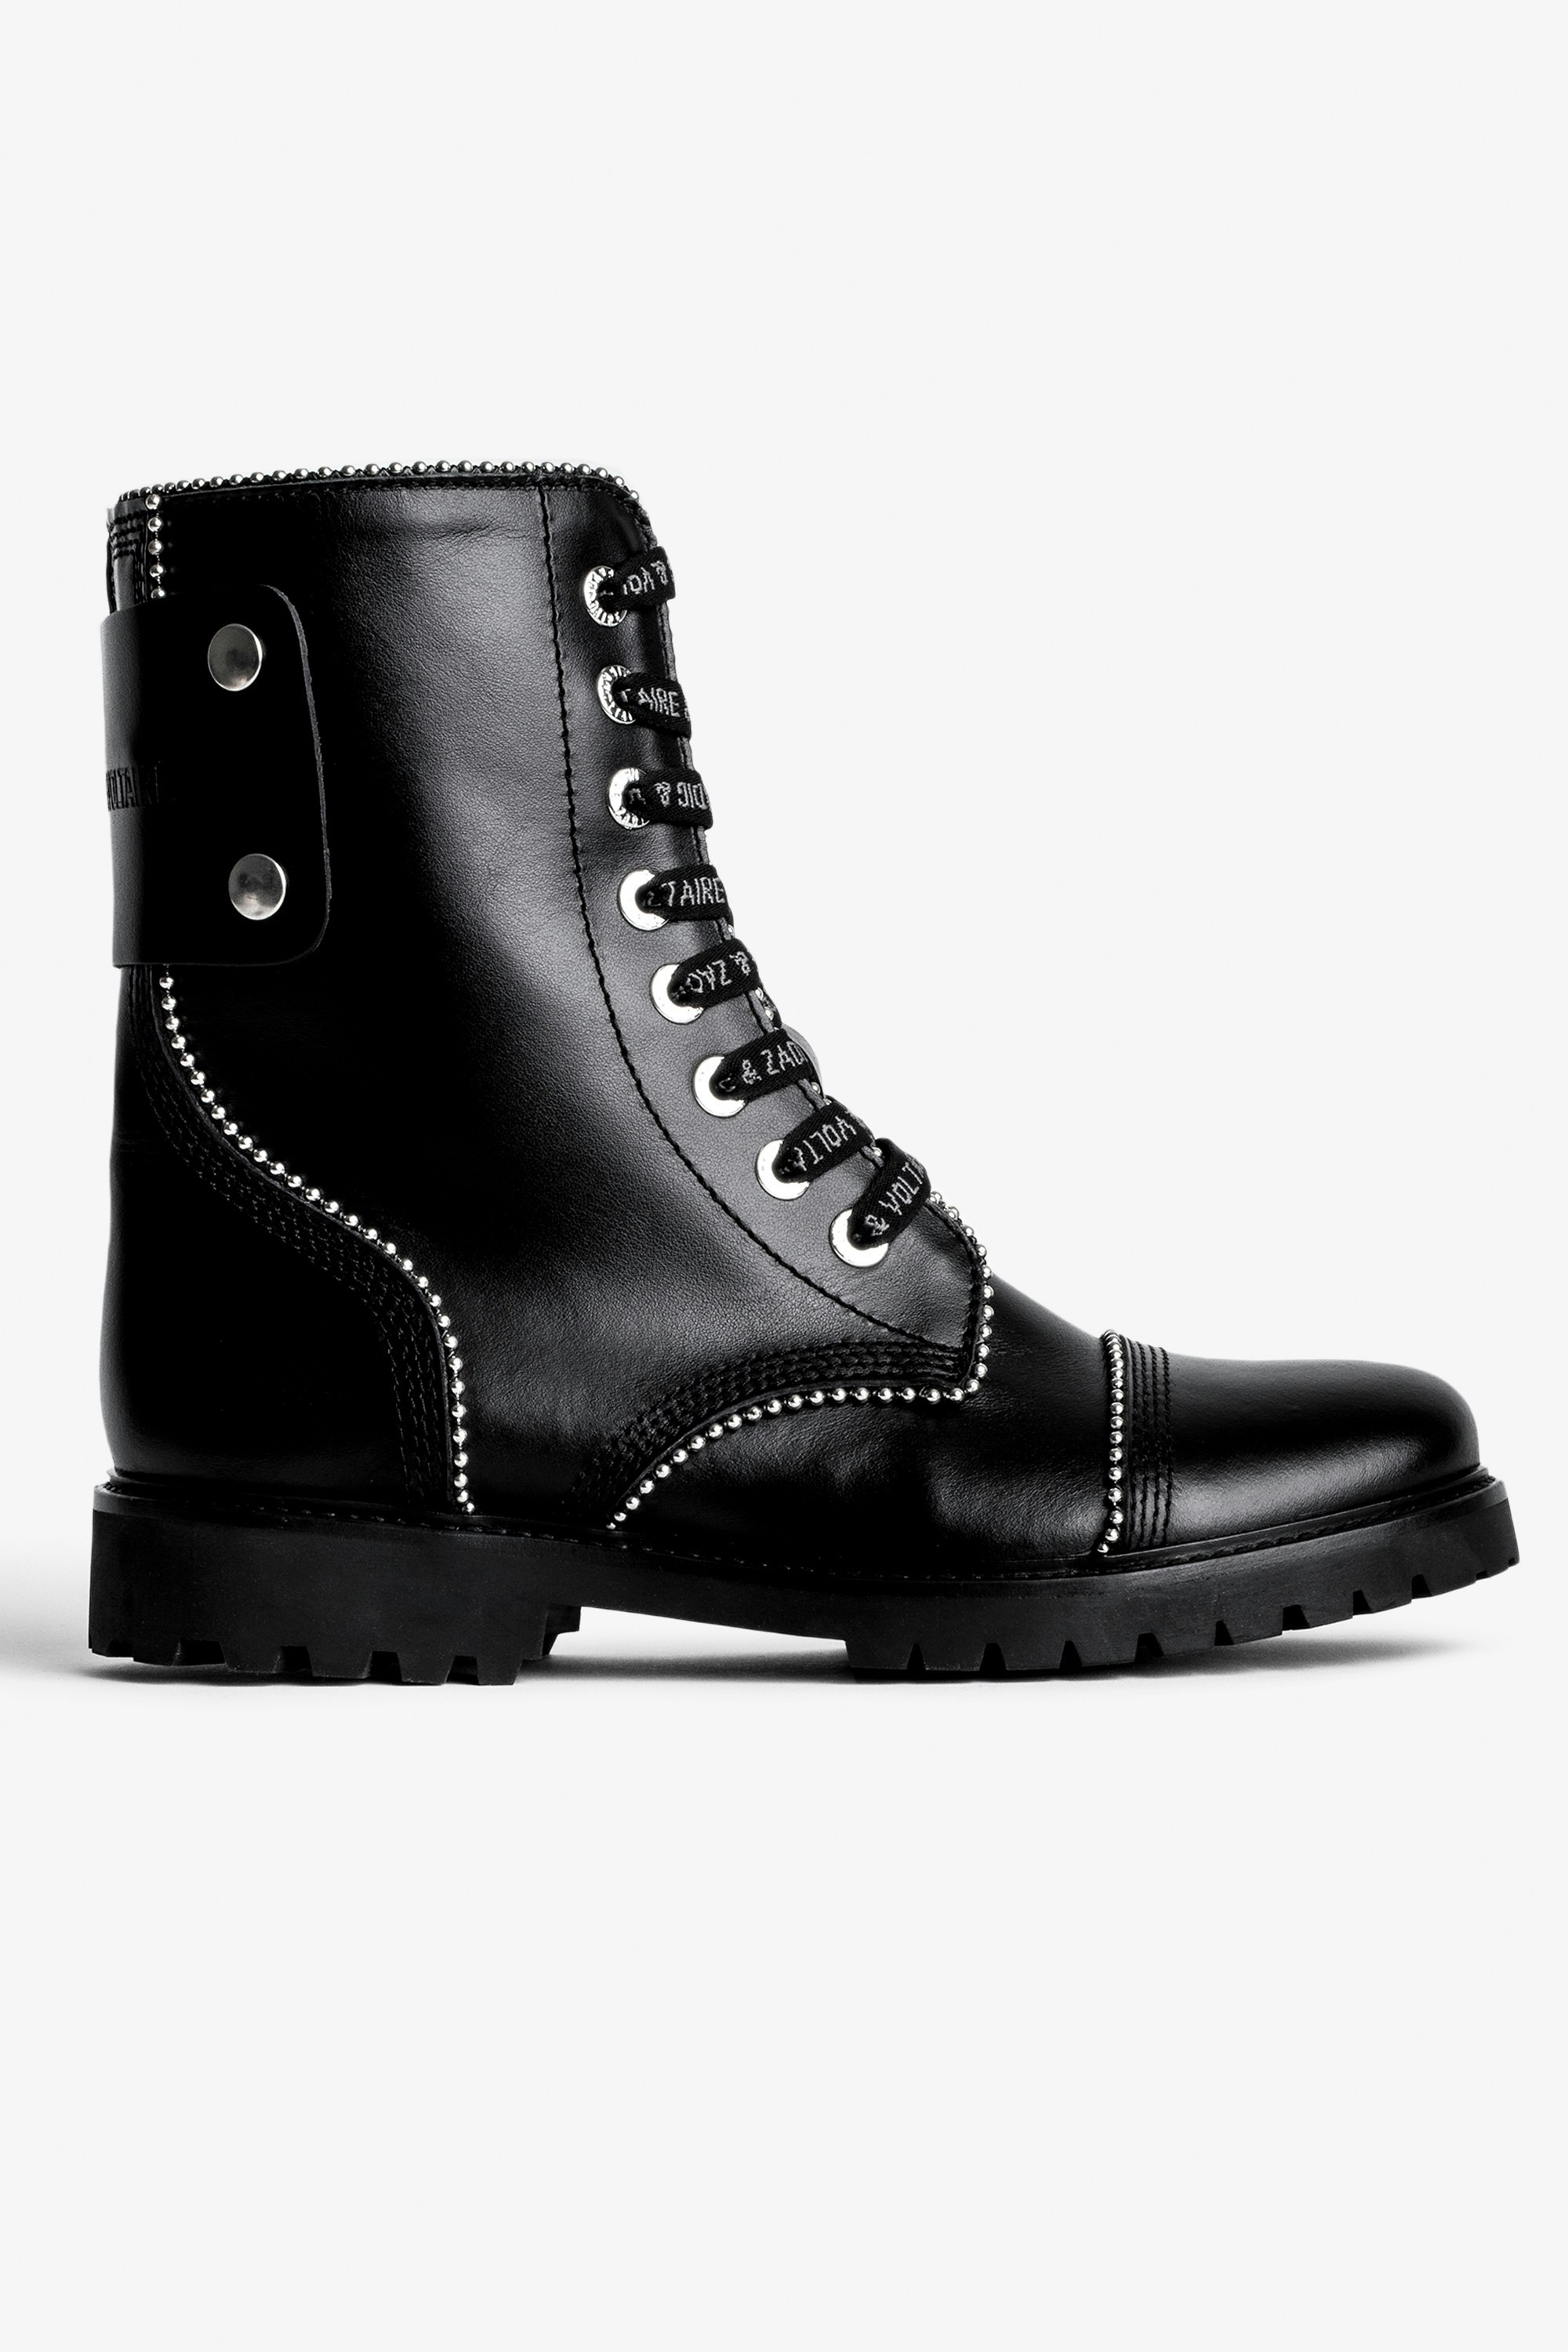 Joe Ankle Boots Leather Women's studded smooth black leather combat boots